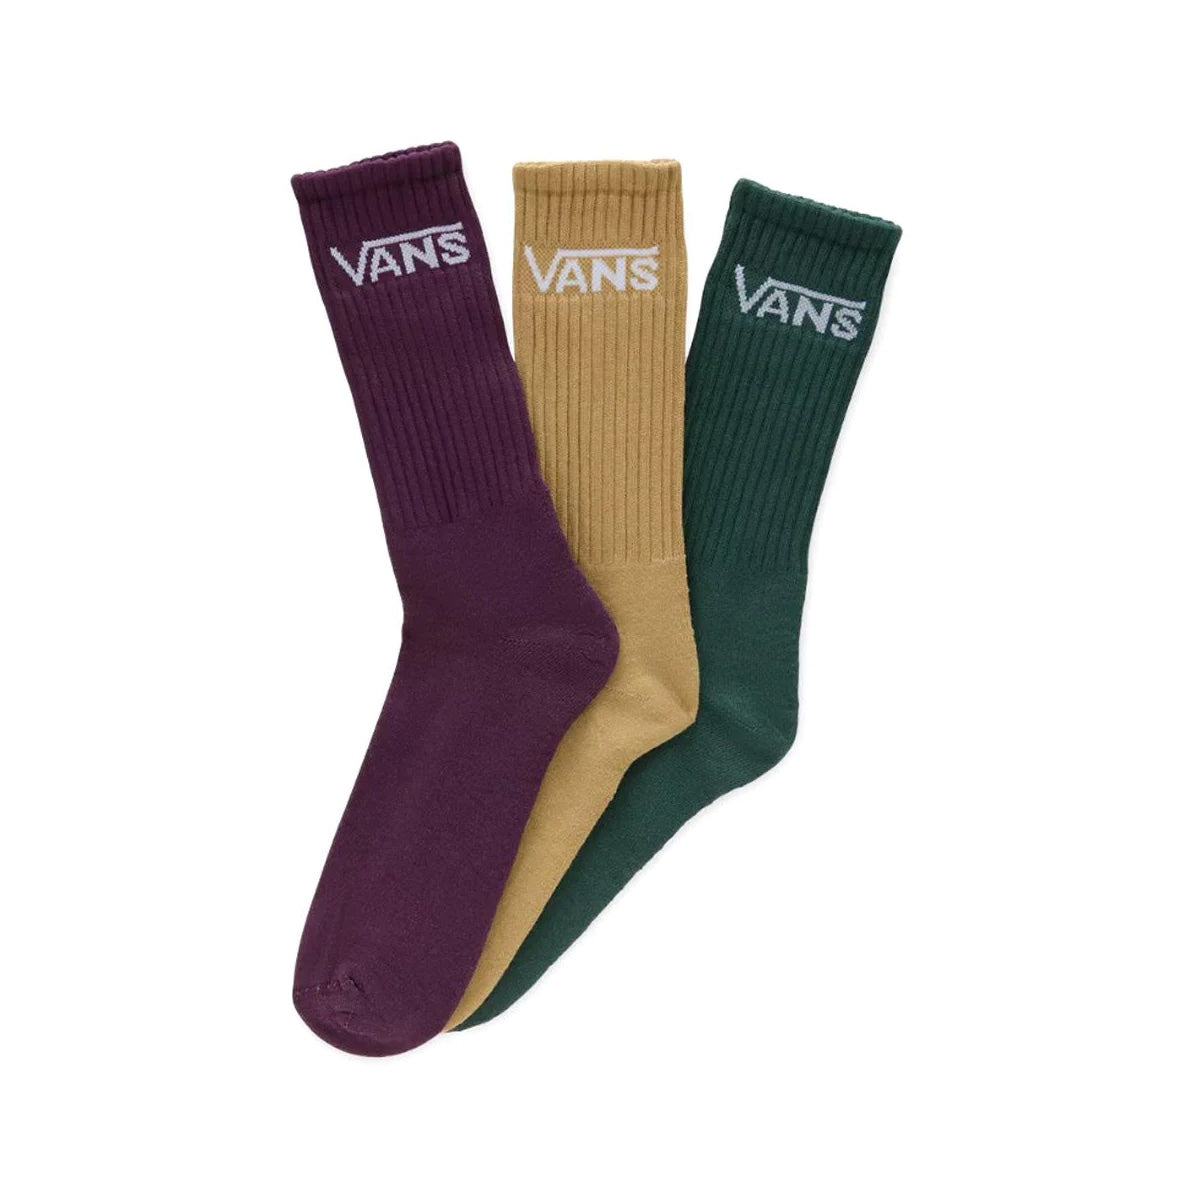 Three pack vans crew socks in green, burgundy and cream with white vans logo. Free uk shipping over £50